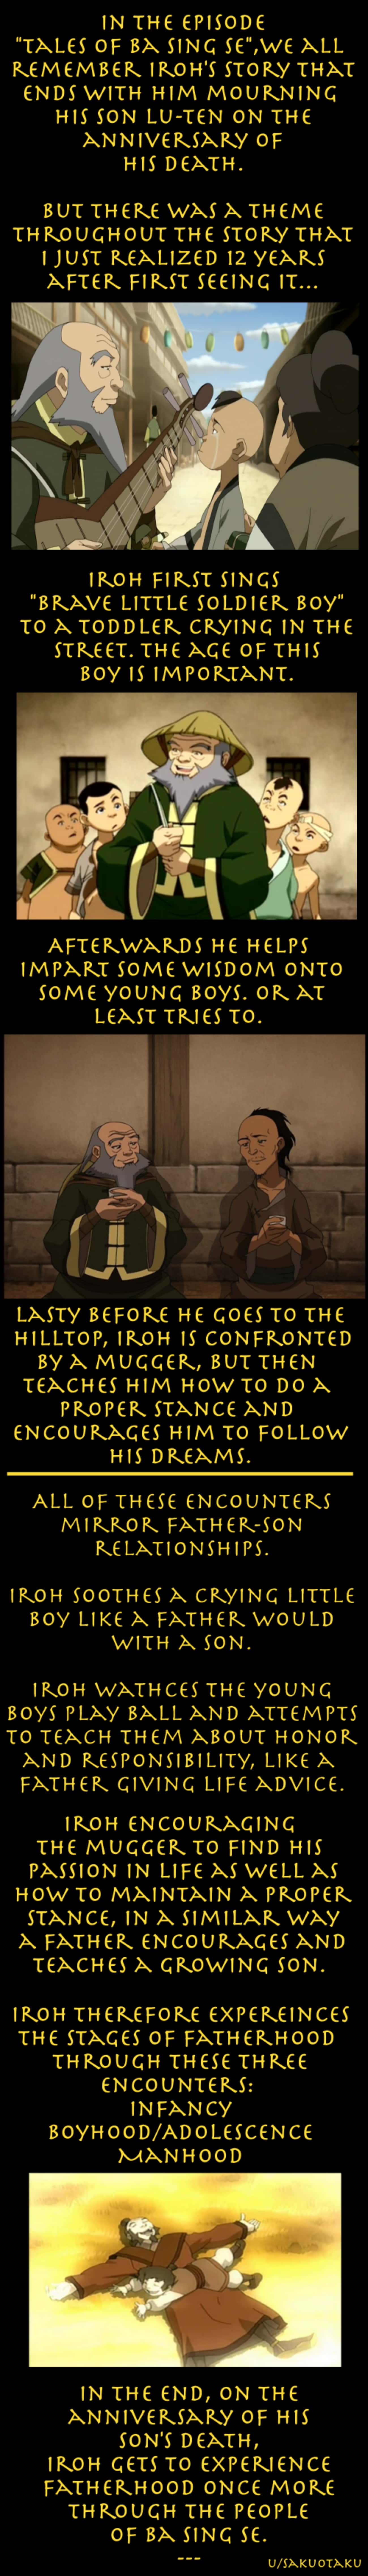 Every Single Encounter In 'The Tale Of Iroh' Revolves Around The Theme Of Fatherhood.